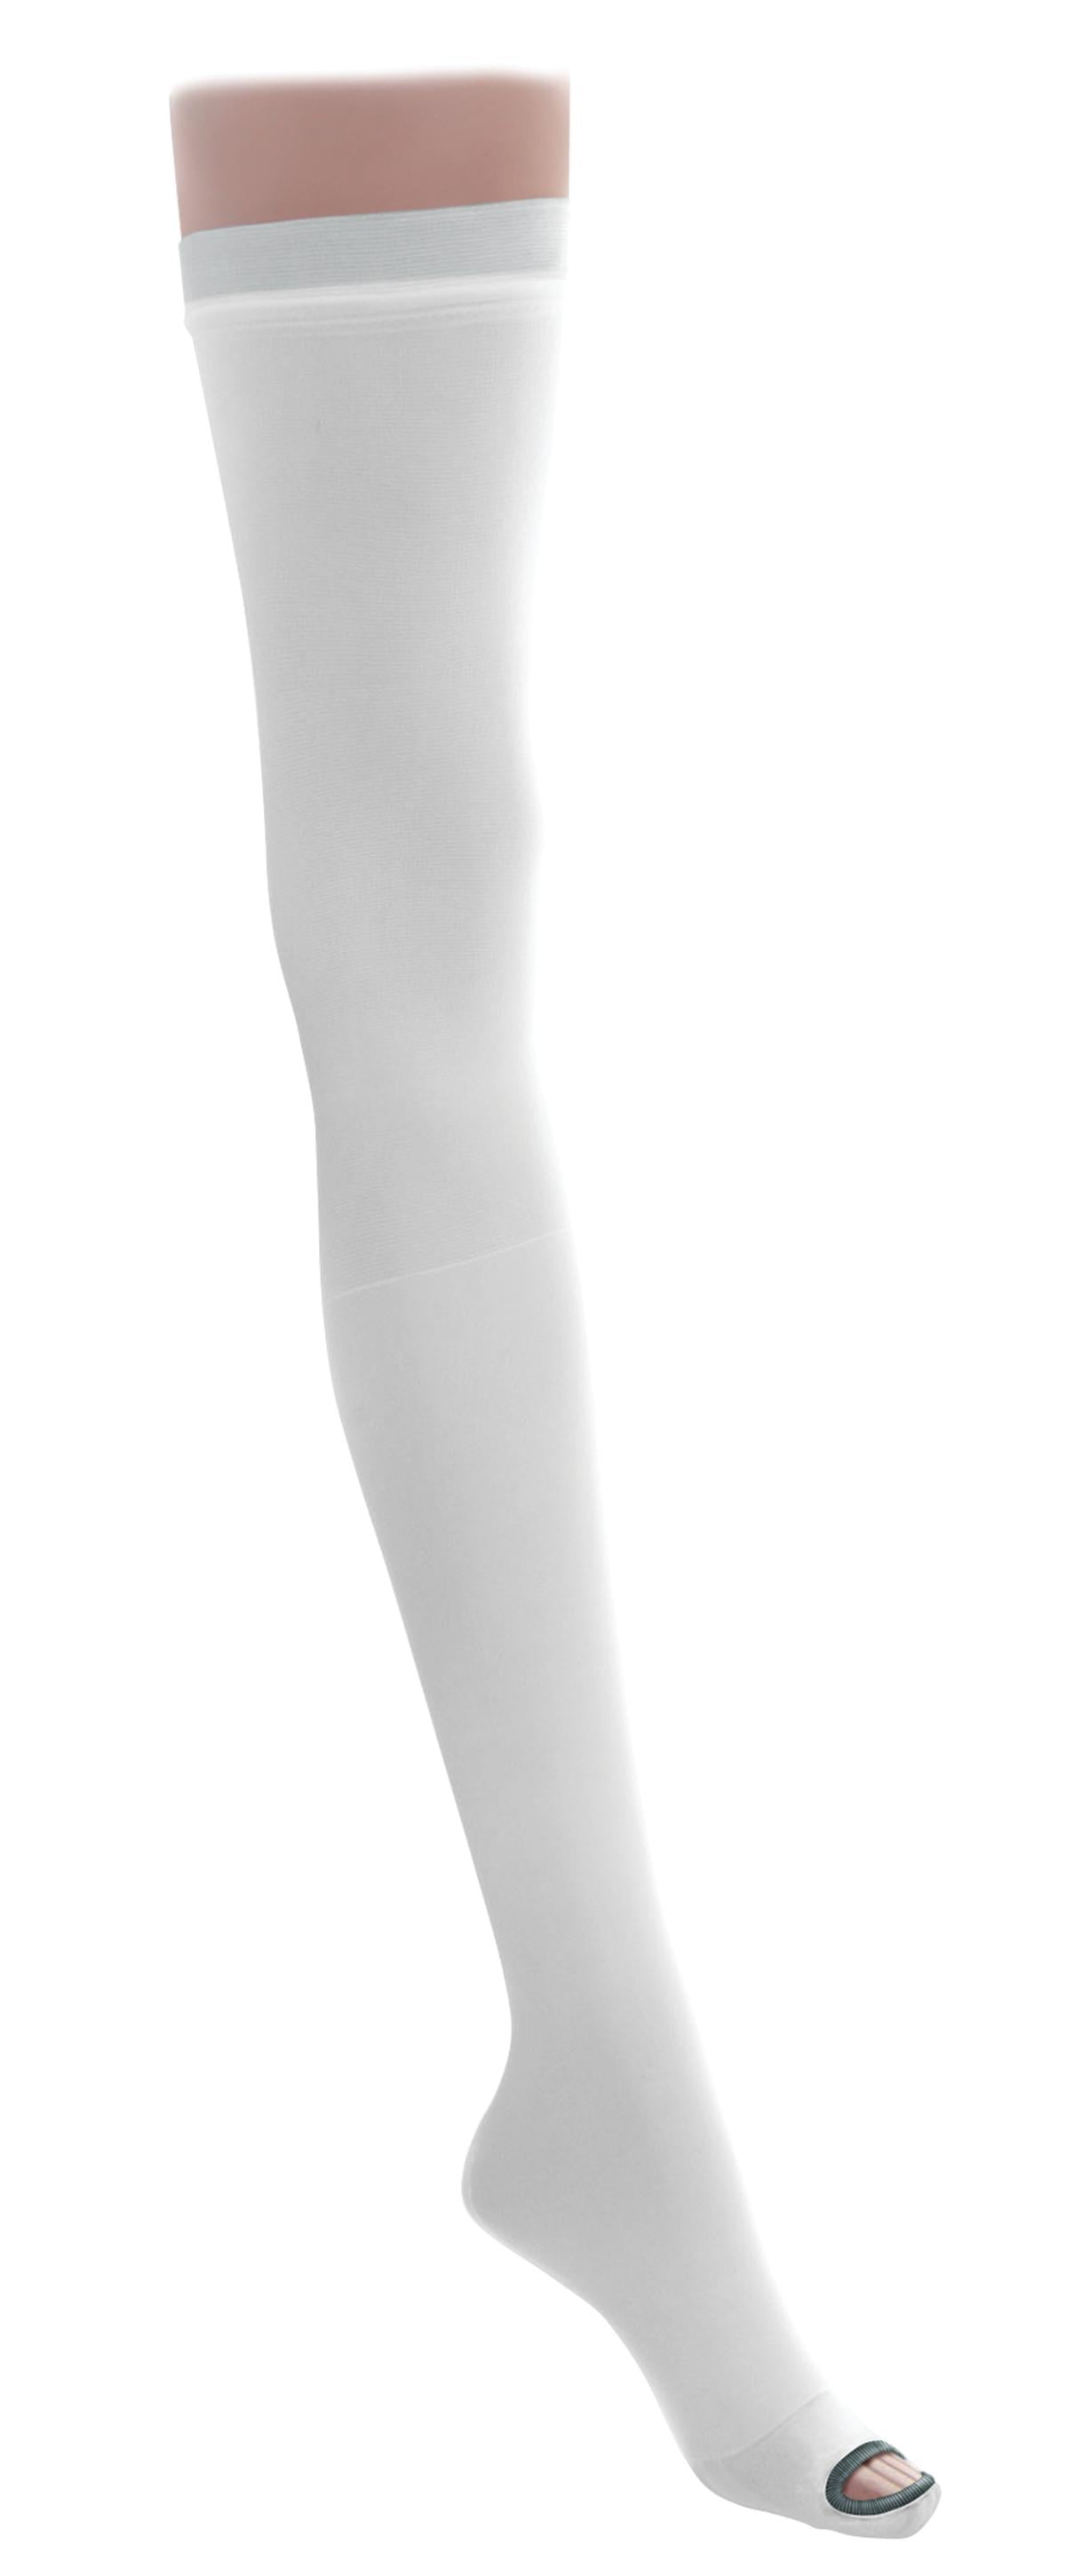 Thigh High Medical Compression Stockings